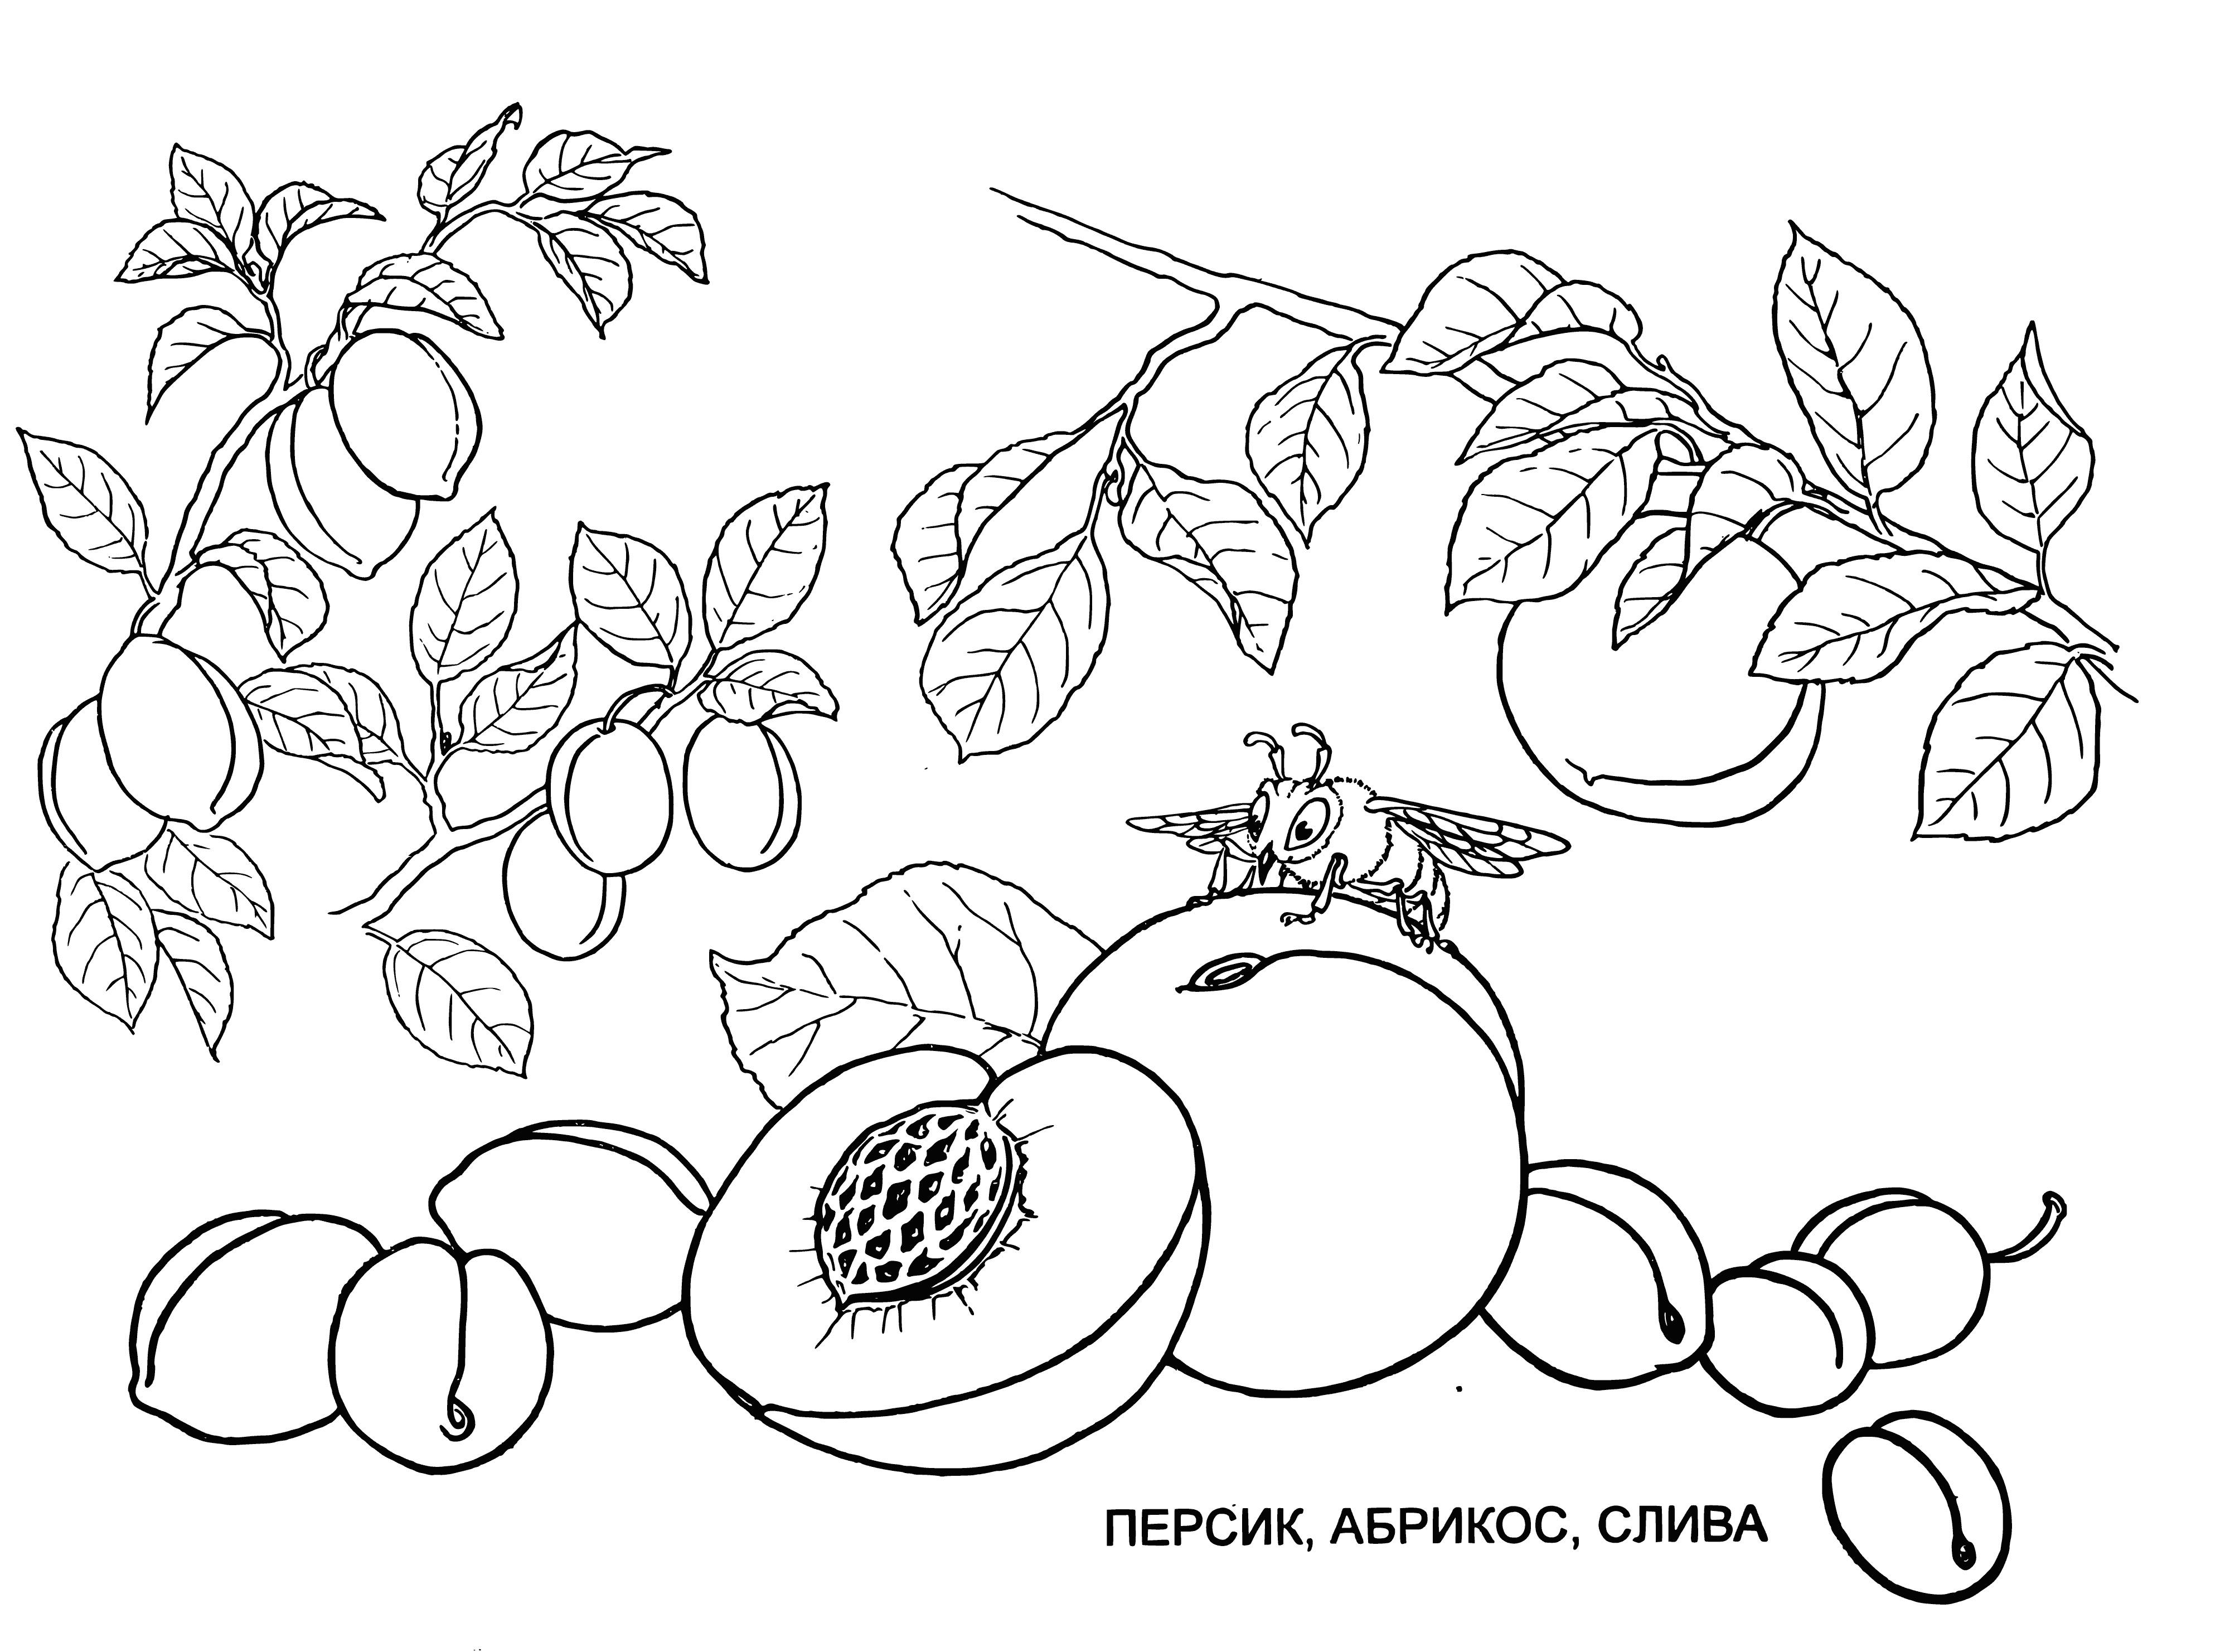 Peaches, apricot, plum coloring page